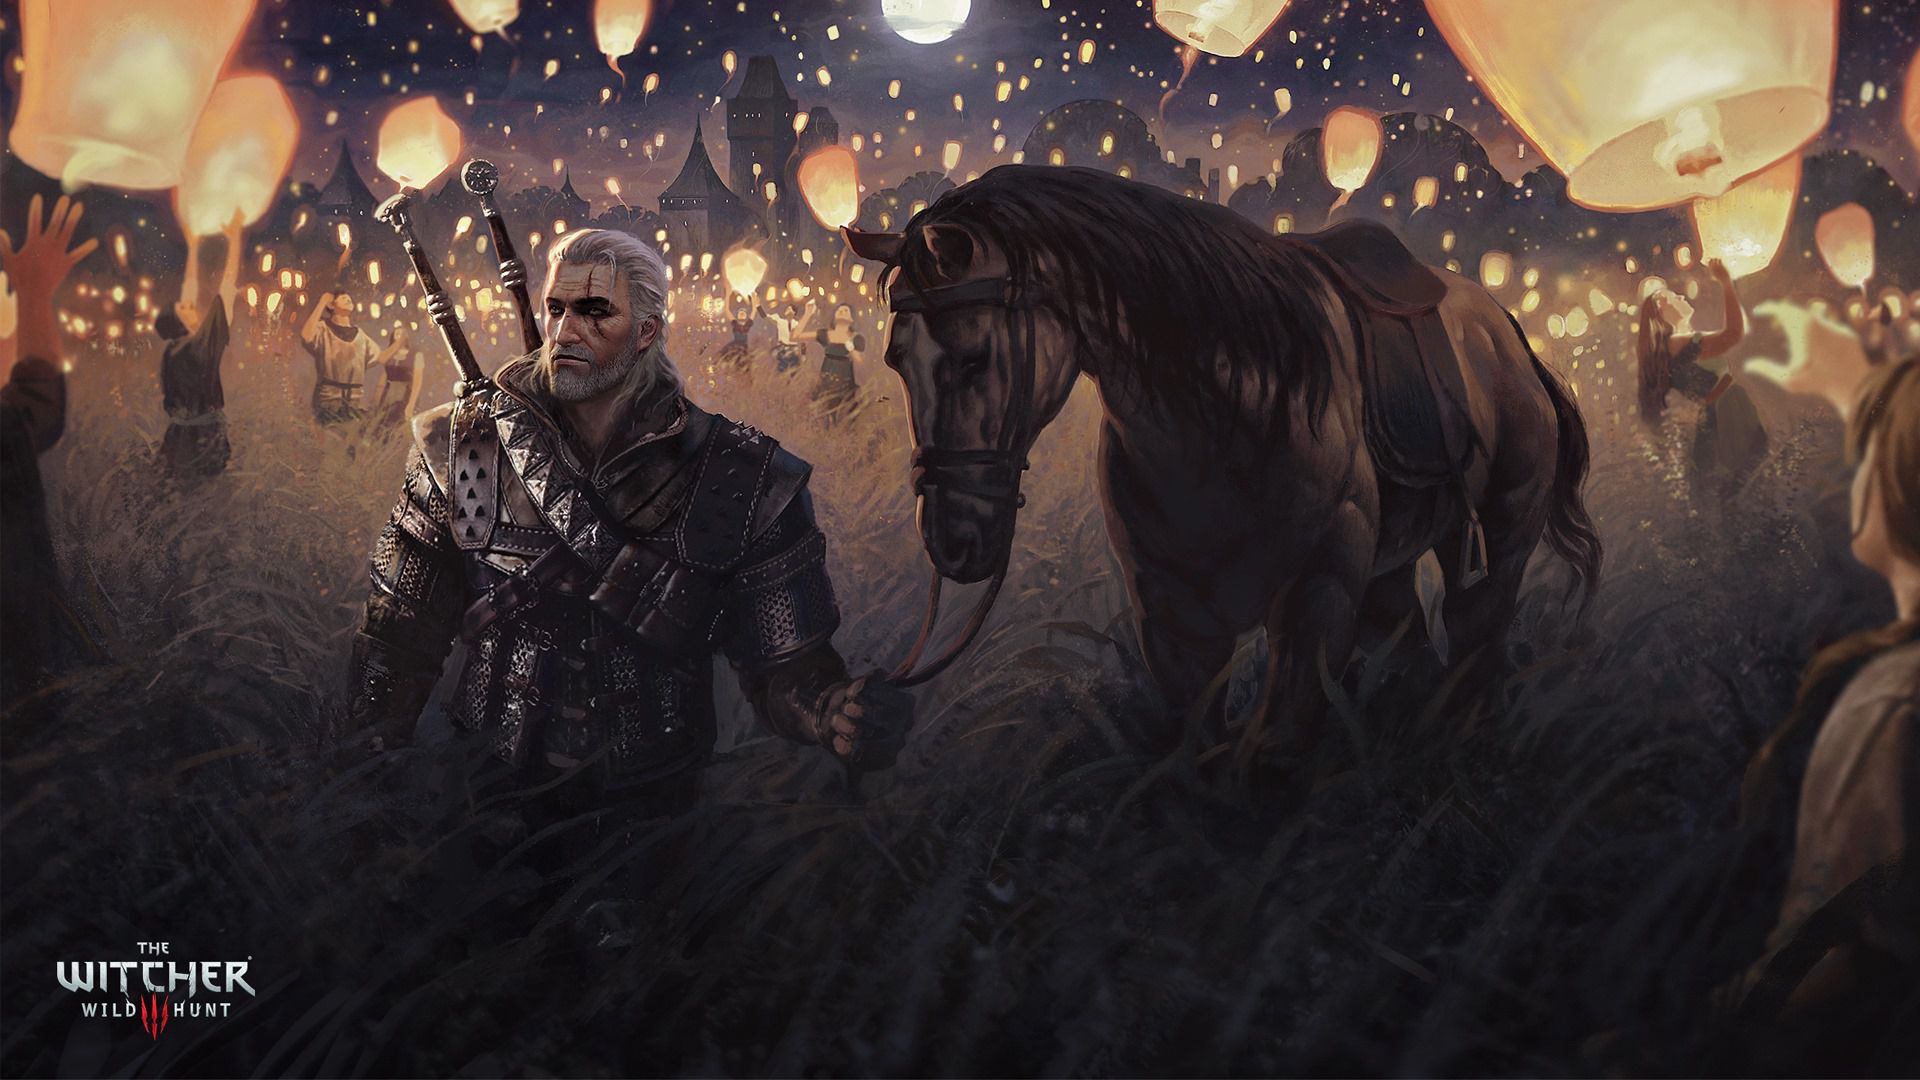 General 1920x1080 artwork video games The Witcher The Witcher 3: Wild Hunt Geralt of Rivia CD Projekt RED video game characters book characters